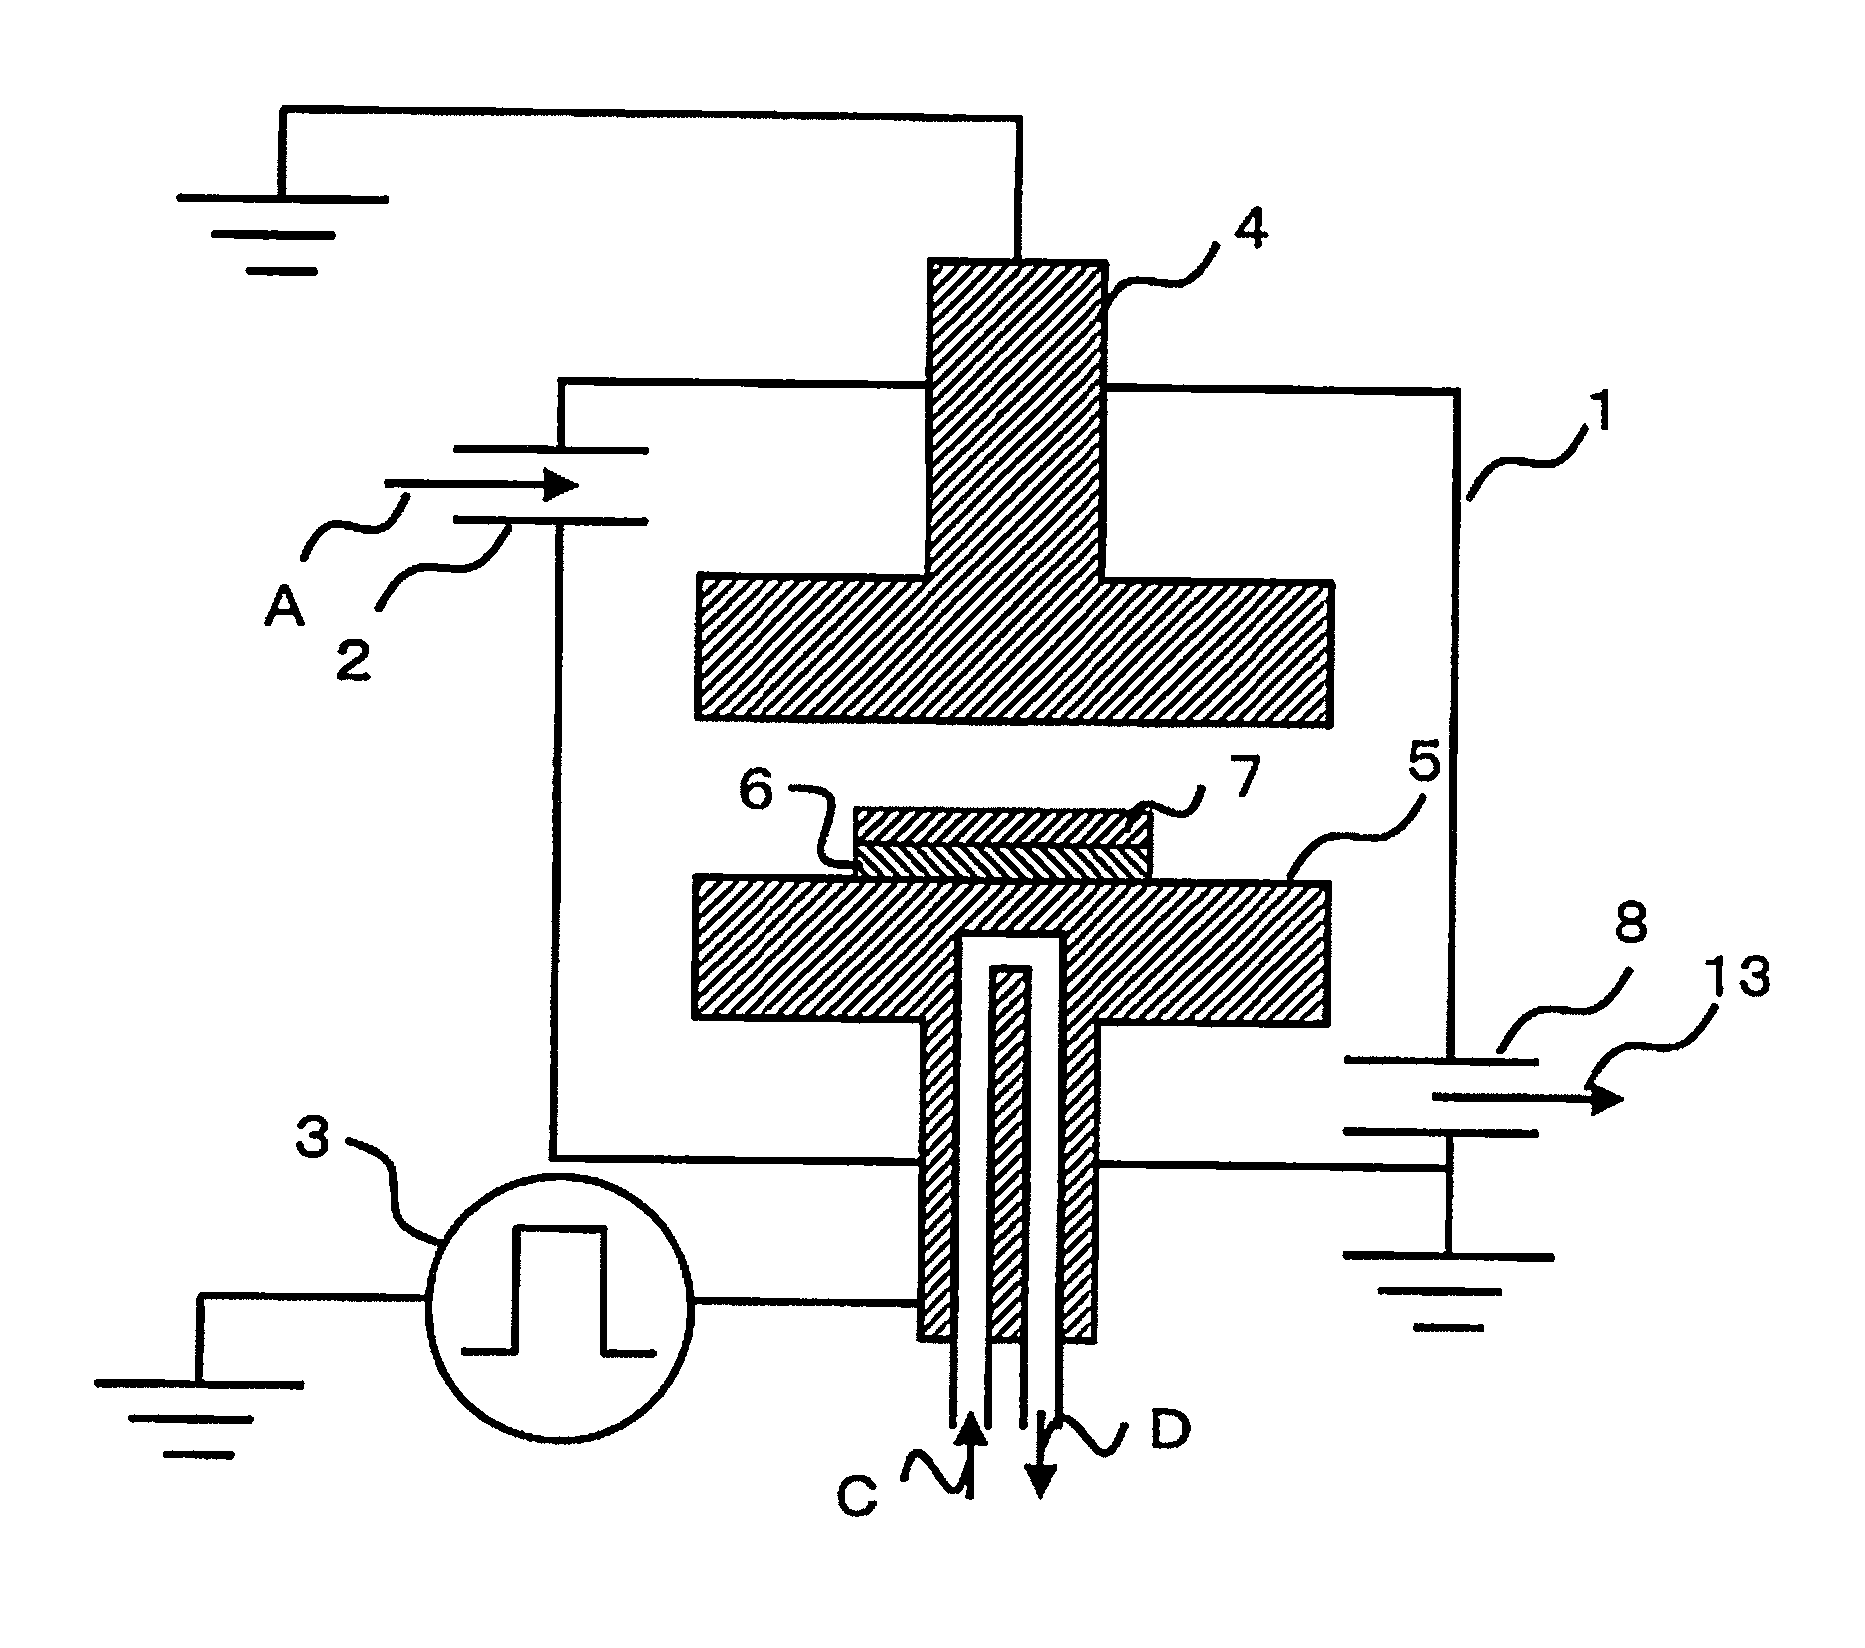 Methods of generating plasma, of etching an organic material film, of generating minus ions, of oxidation and nitriding